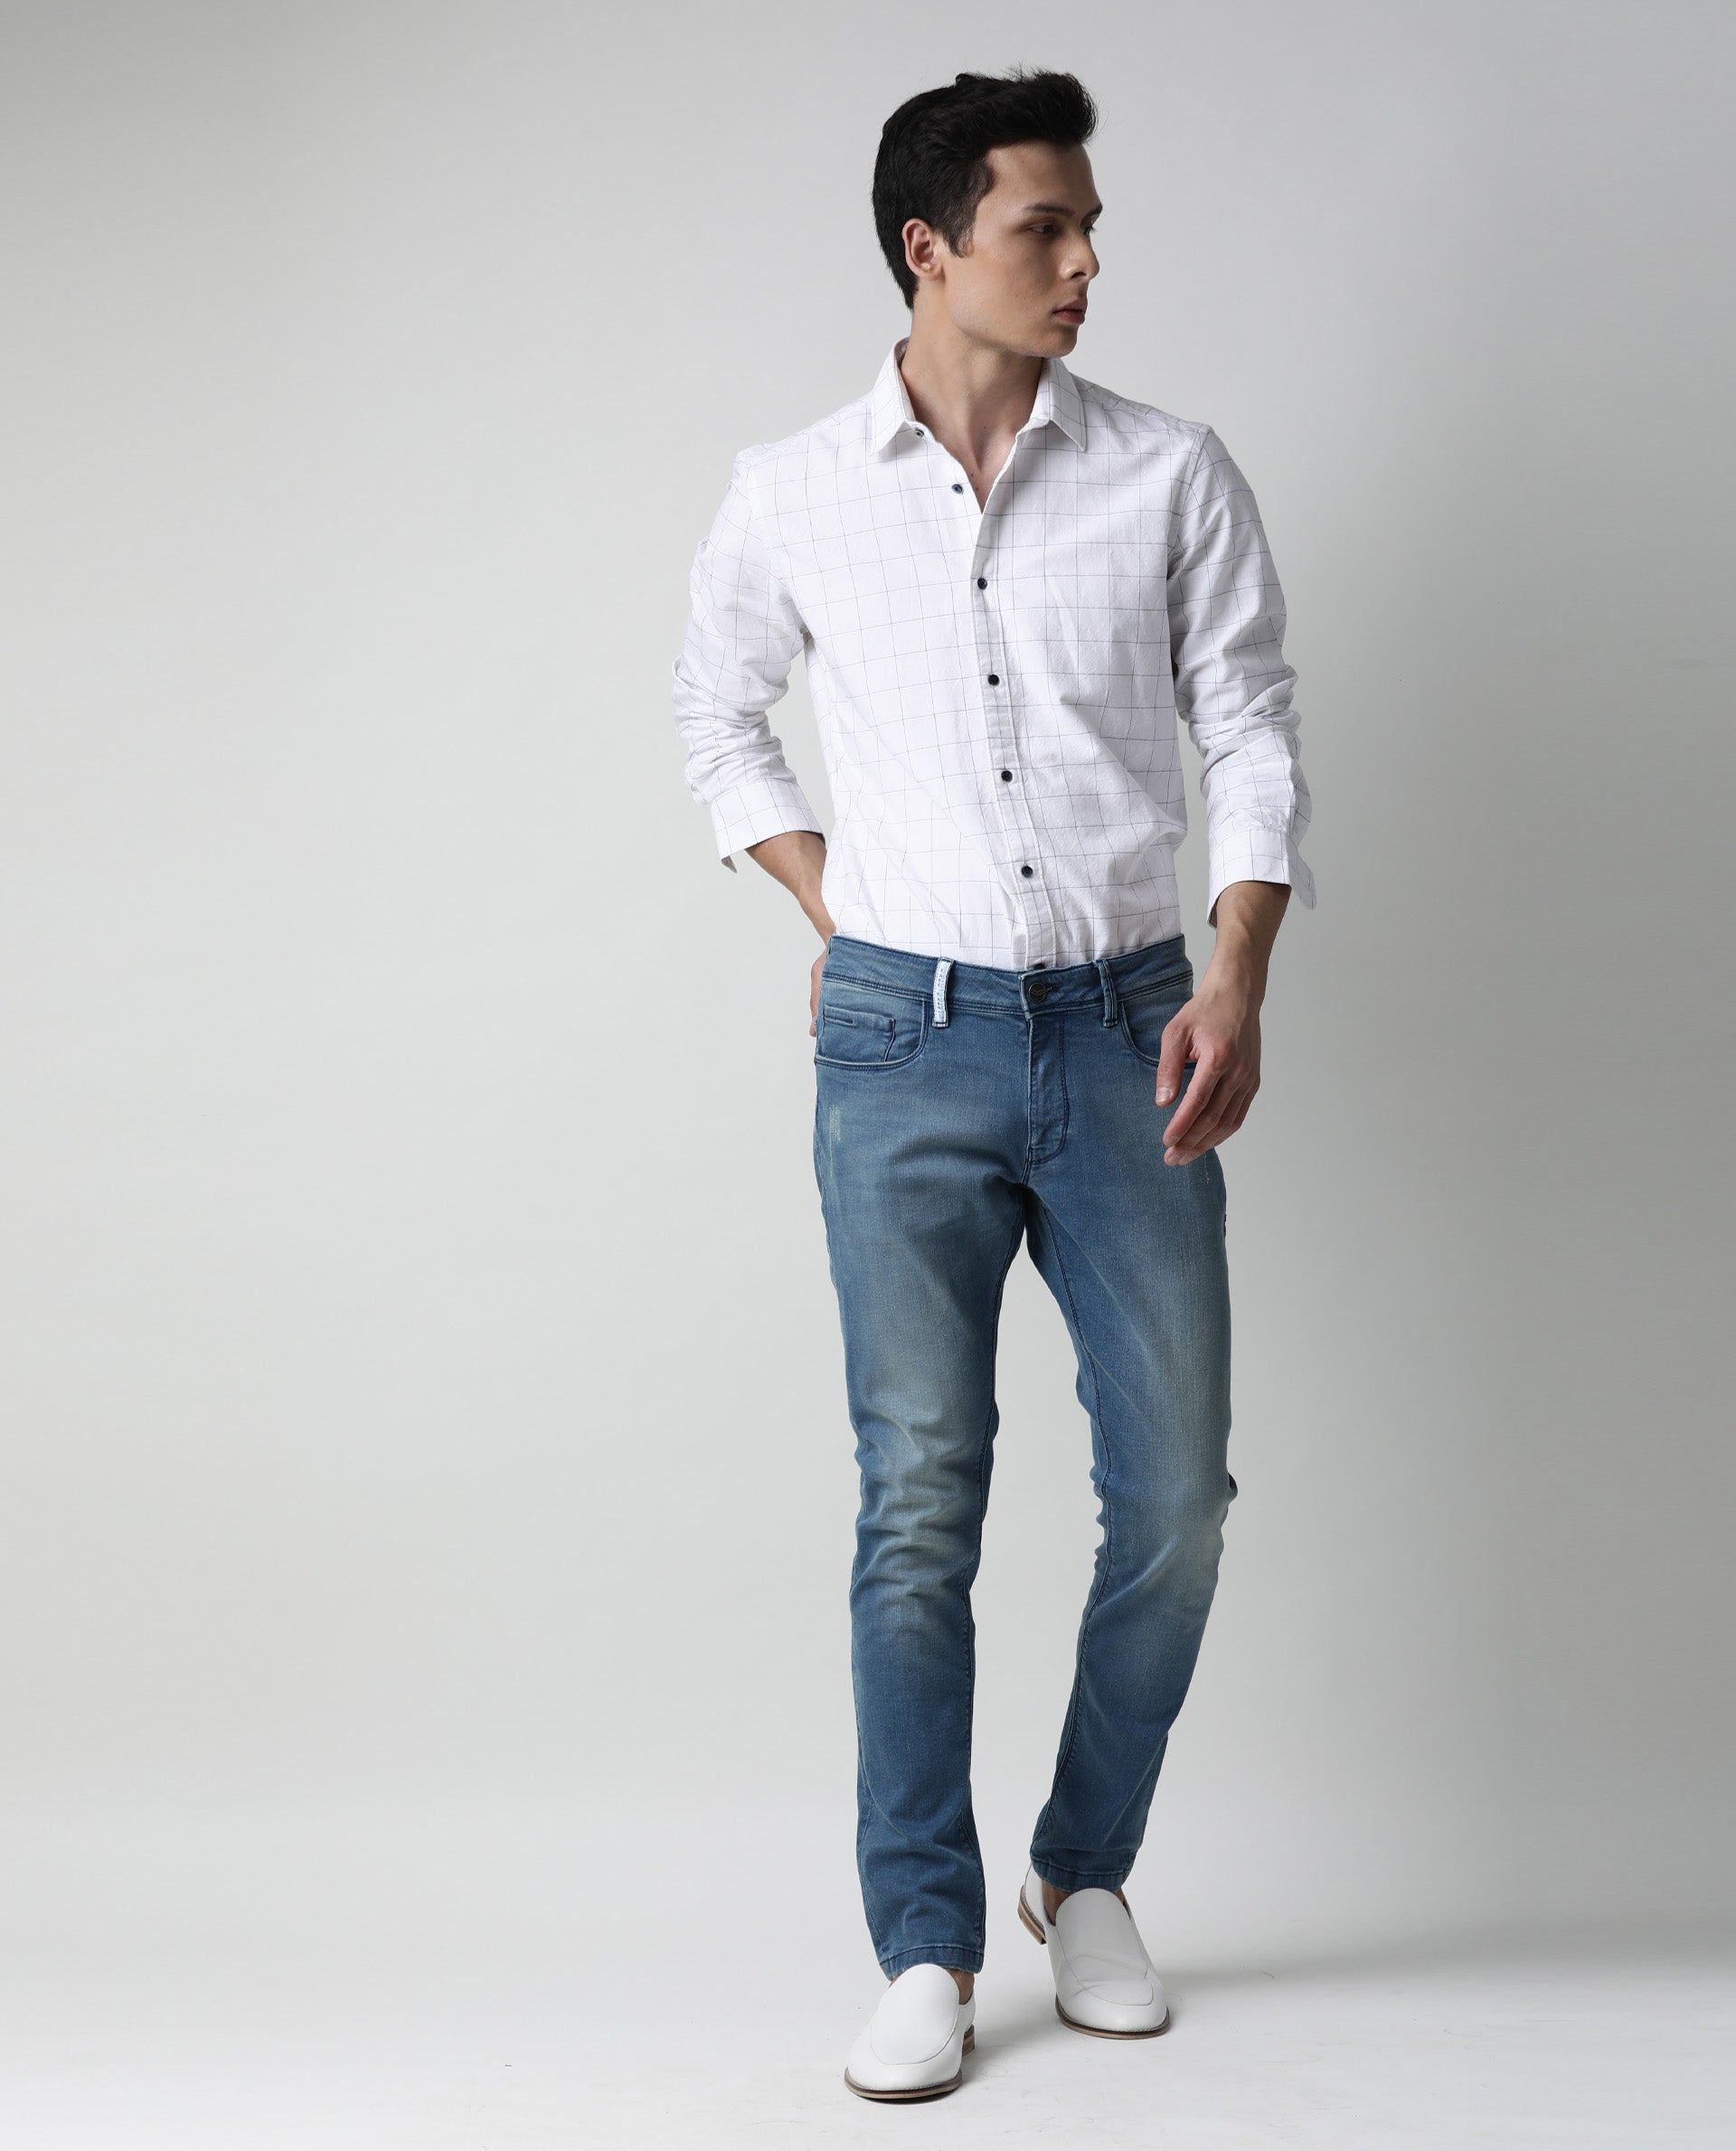 X-LENT TAPERED JEANS | CLOSED | Jeans outfit men, Mens fashion jeans, Mens  tapered jeans